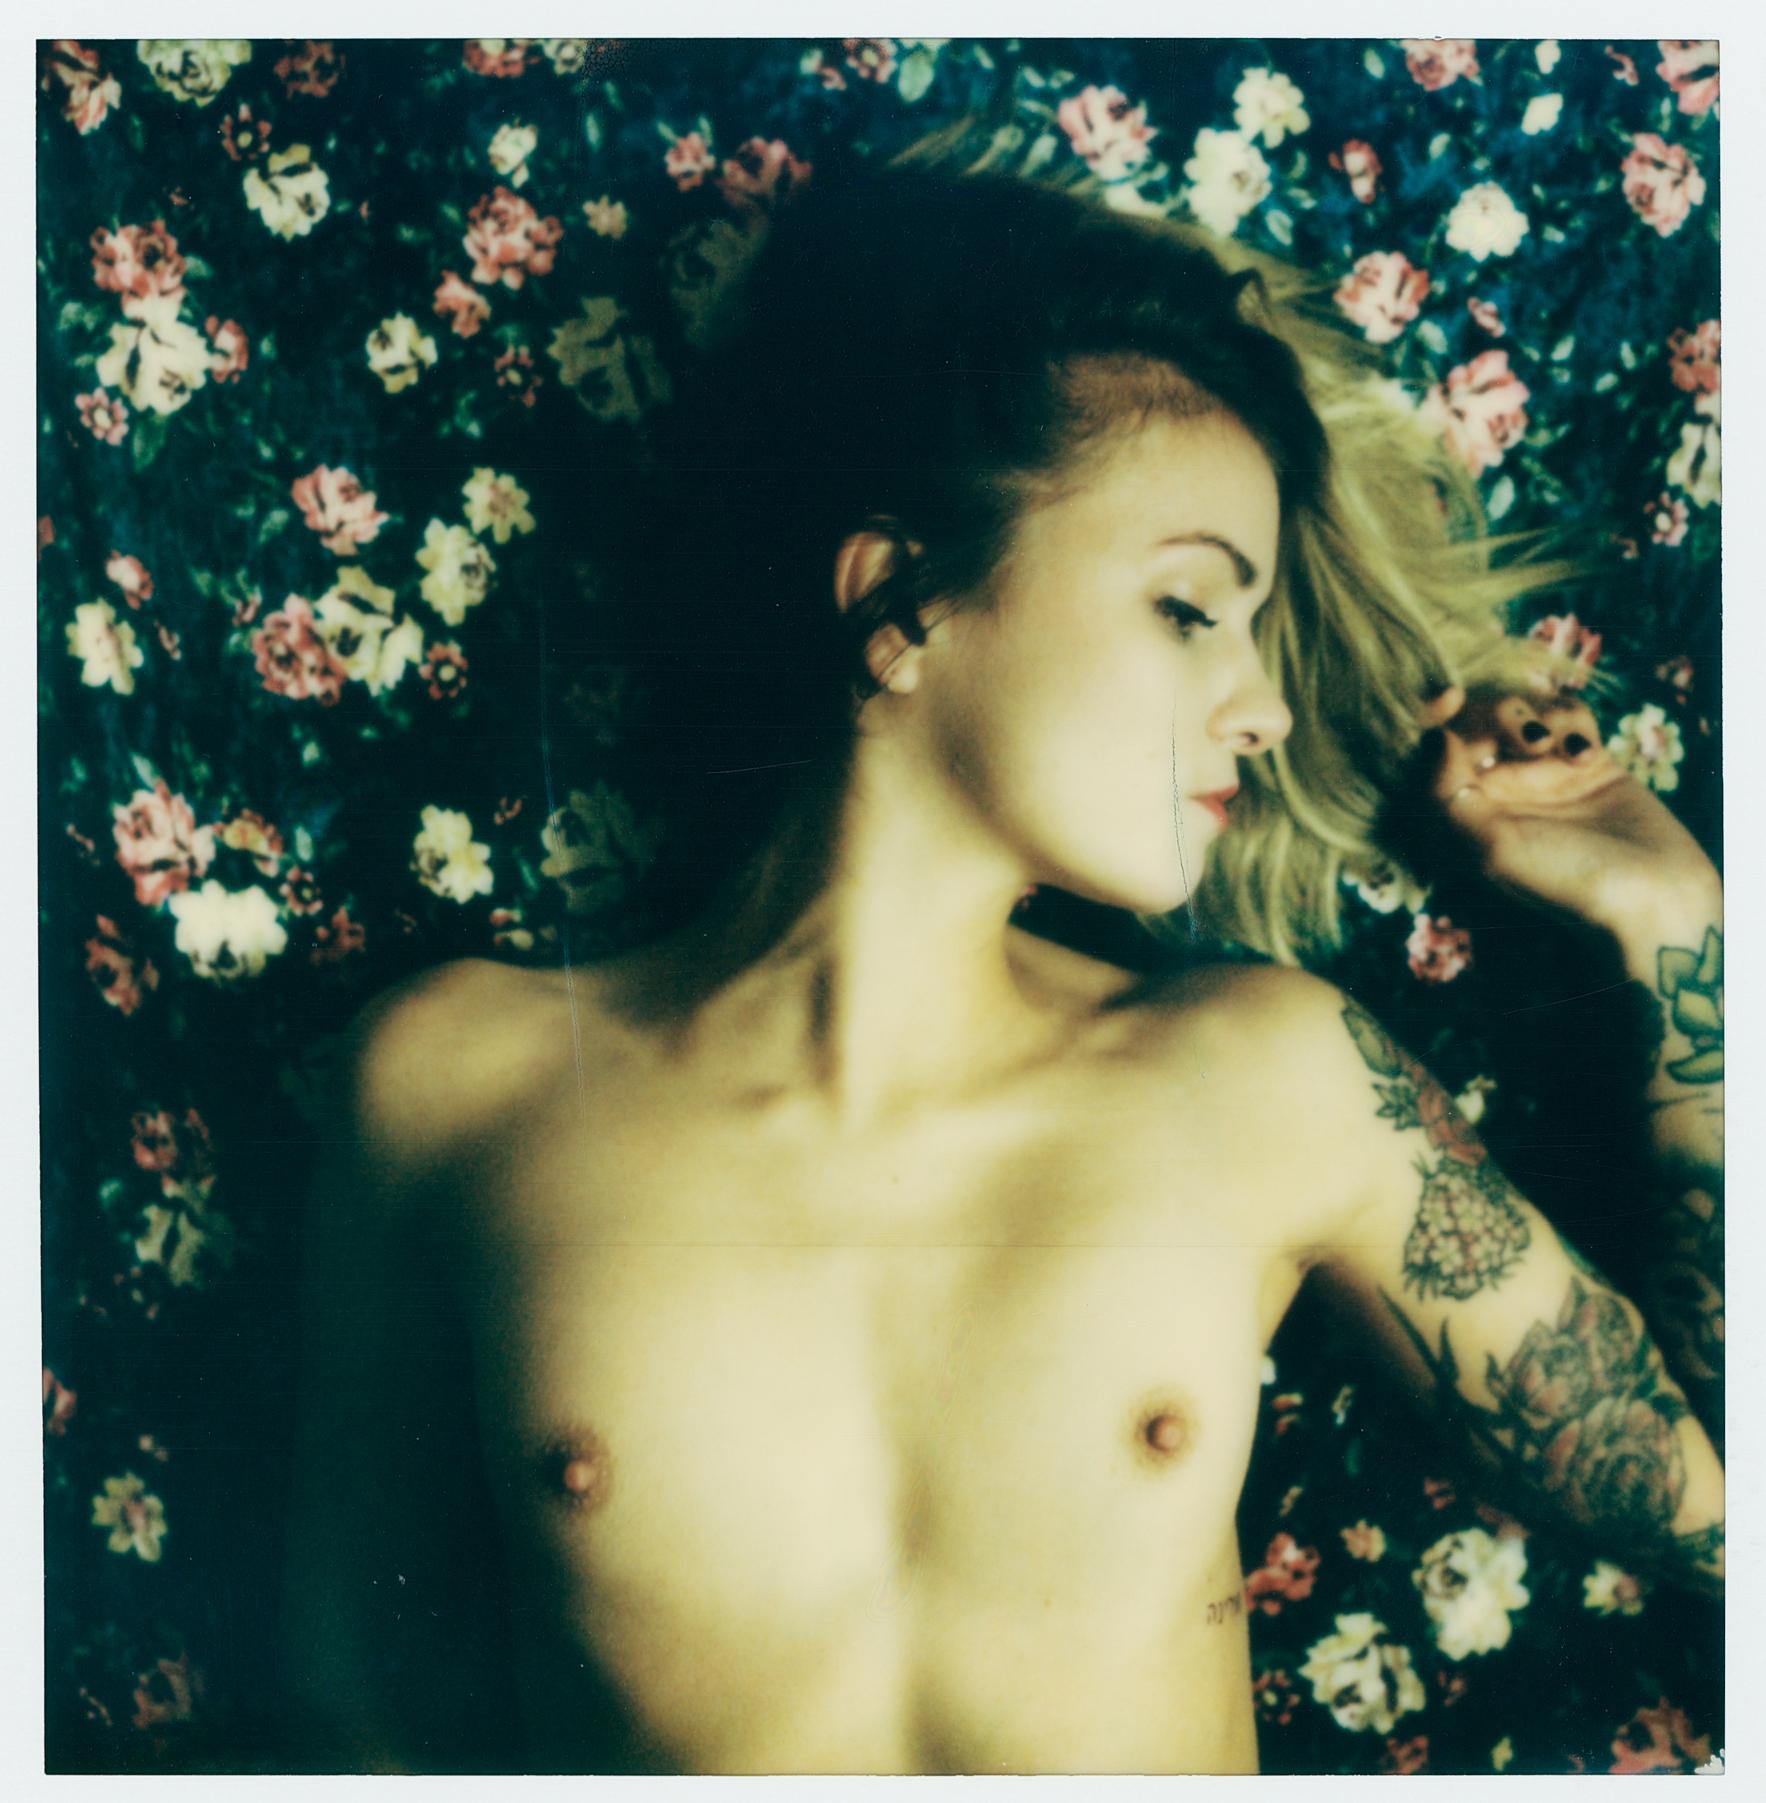 CLOSING TIME SESSIONS - 21st Century, Contemporary, Polaroid, Nude